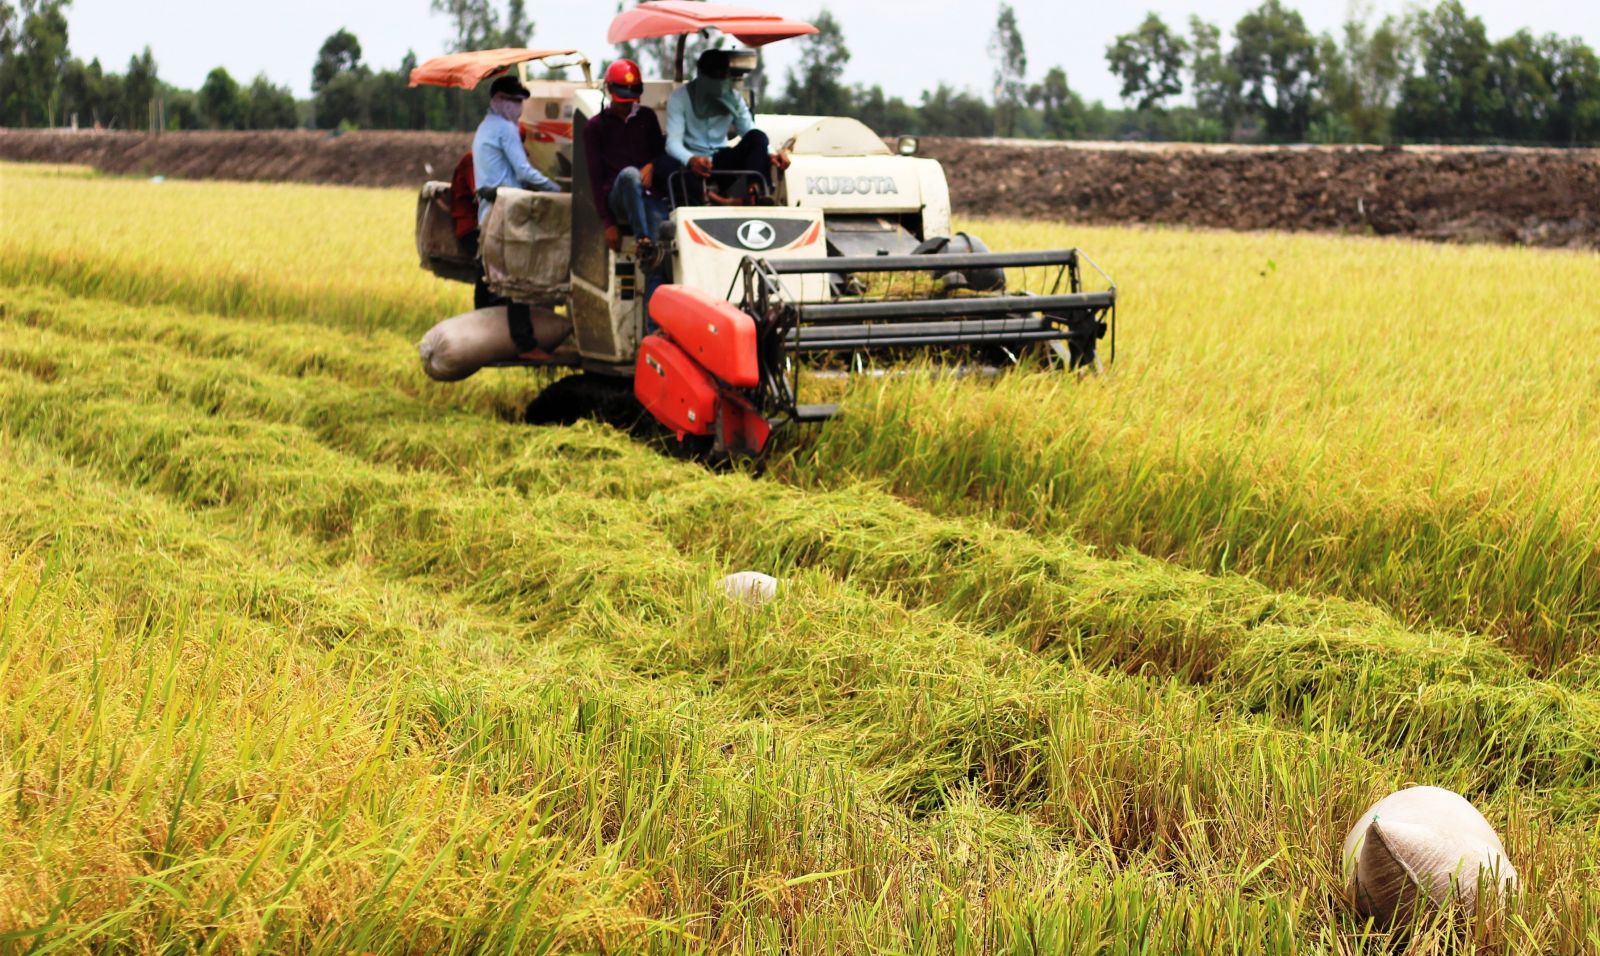 Farmers use machines from sowing to harvesting rice